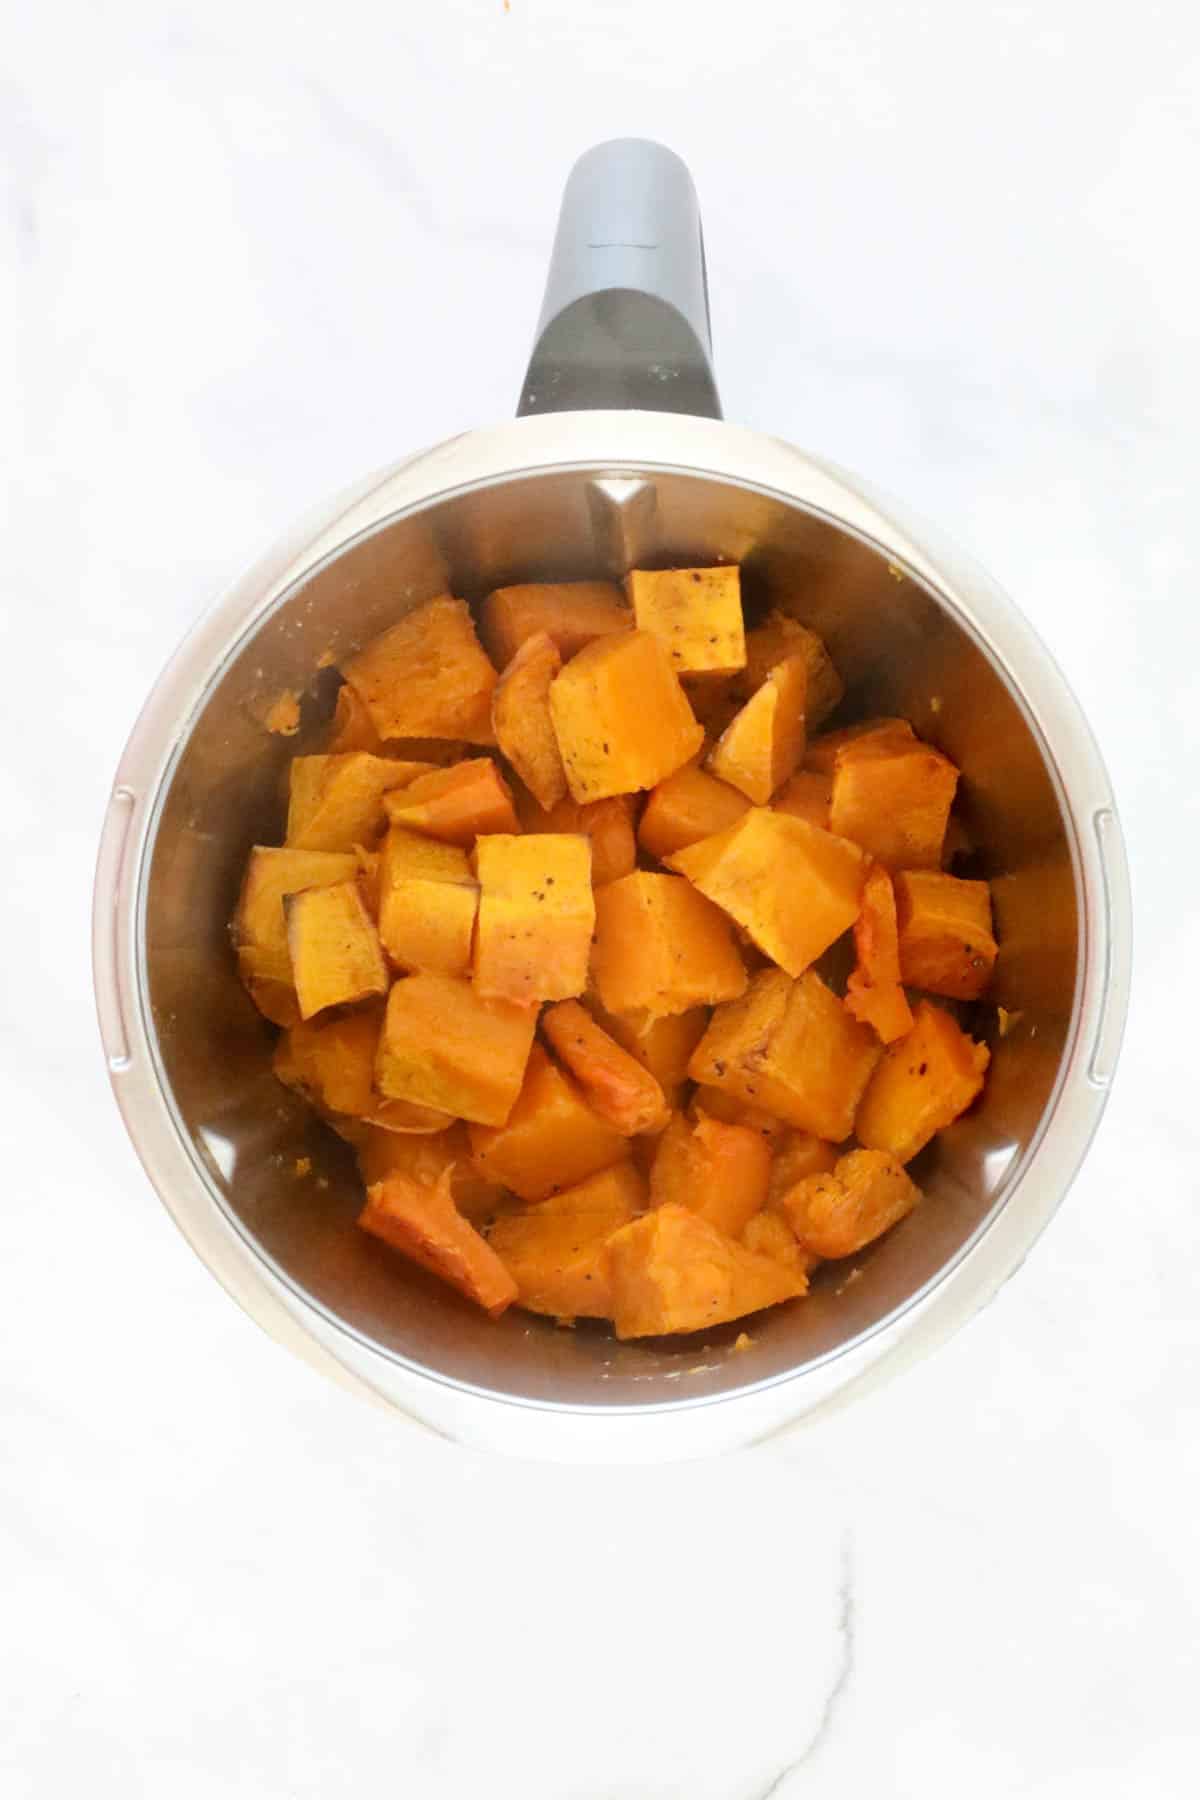 Roasted pumpkin pieces in a stainless jug.